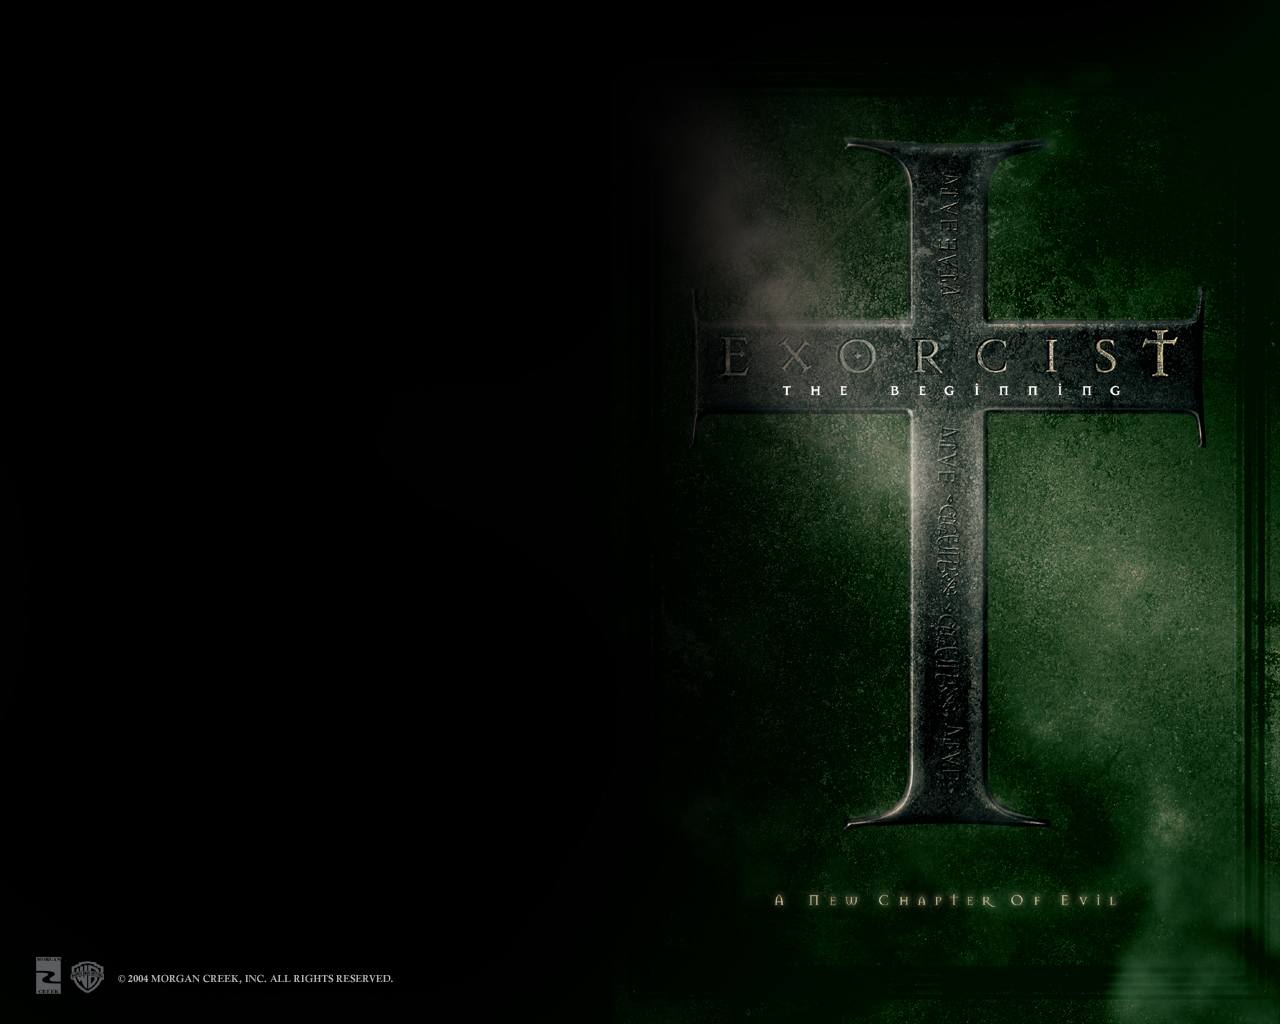 Download High quality Exorcist wallpaper / Movies / 1280x1024